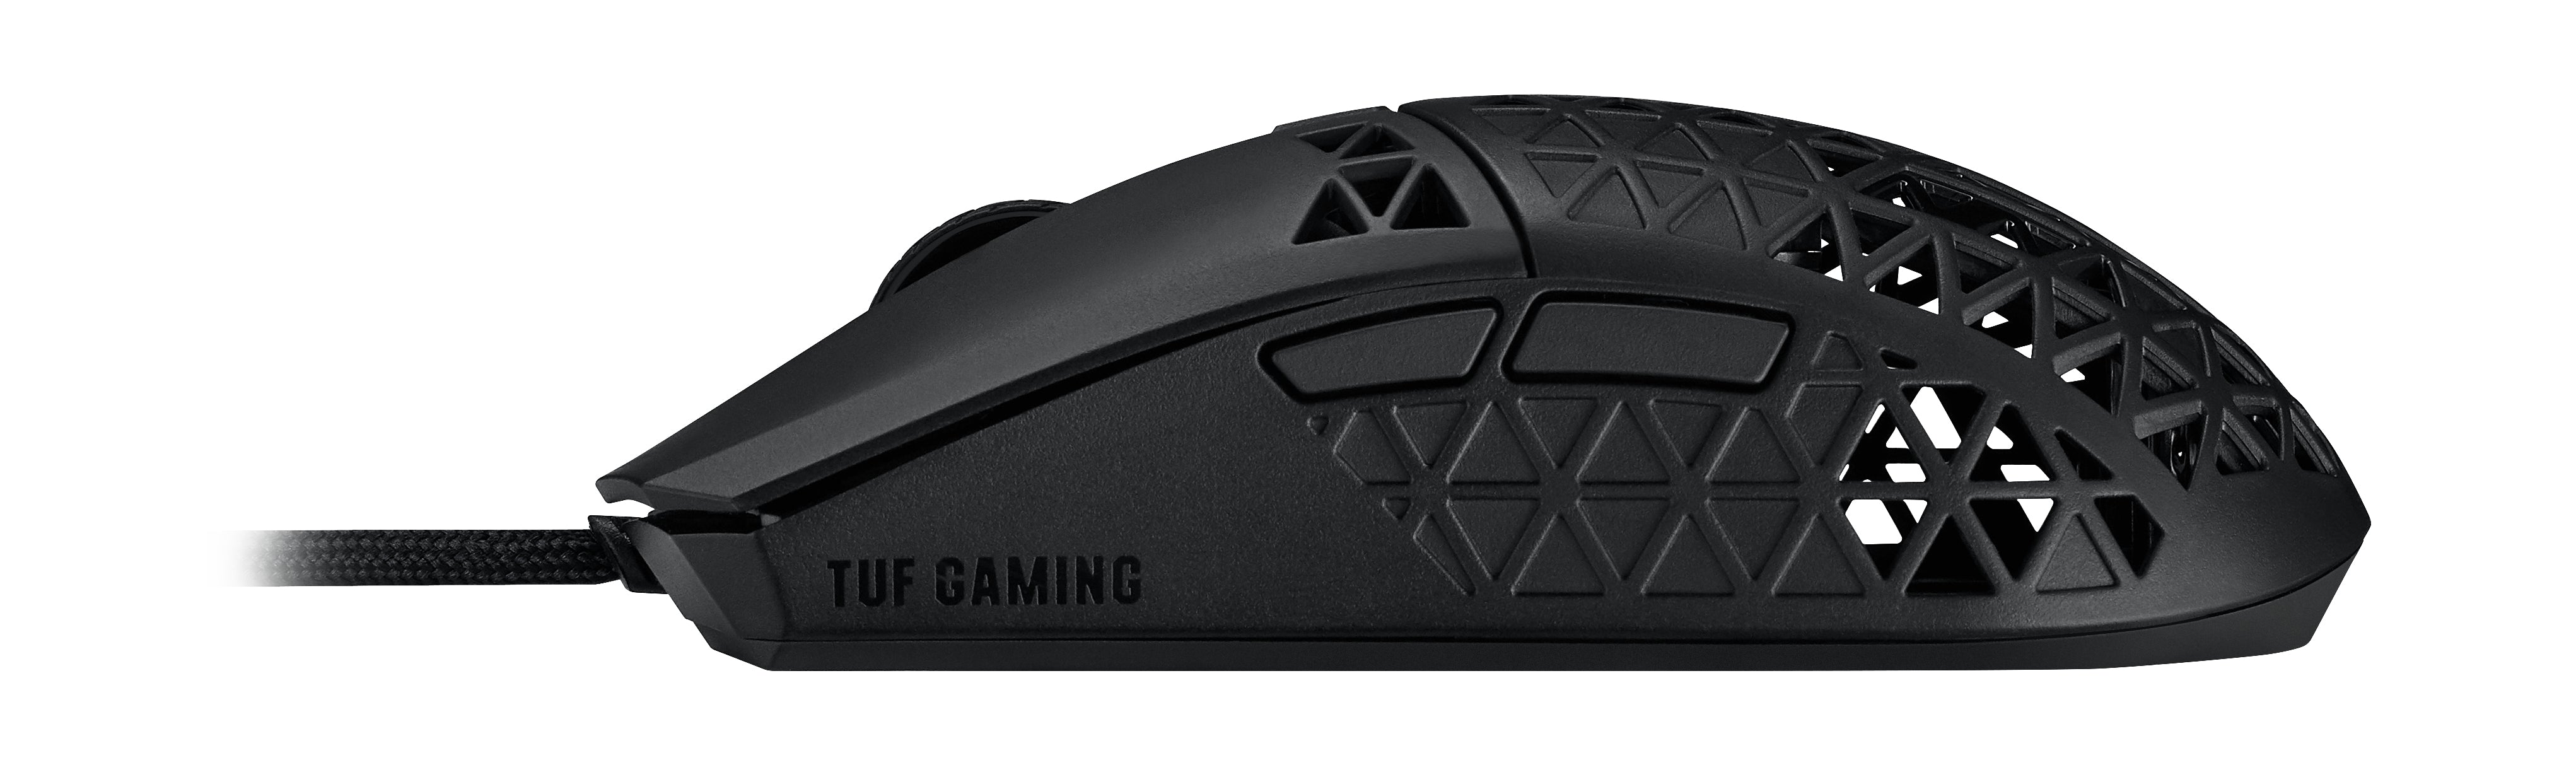 ASUS TUF Gaming M4 AIR Wired Gaming Mouse